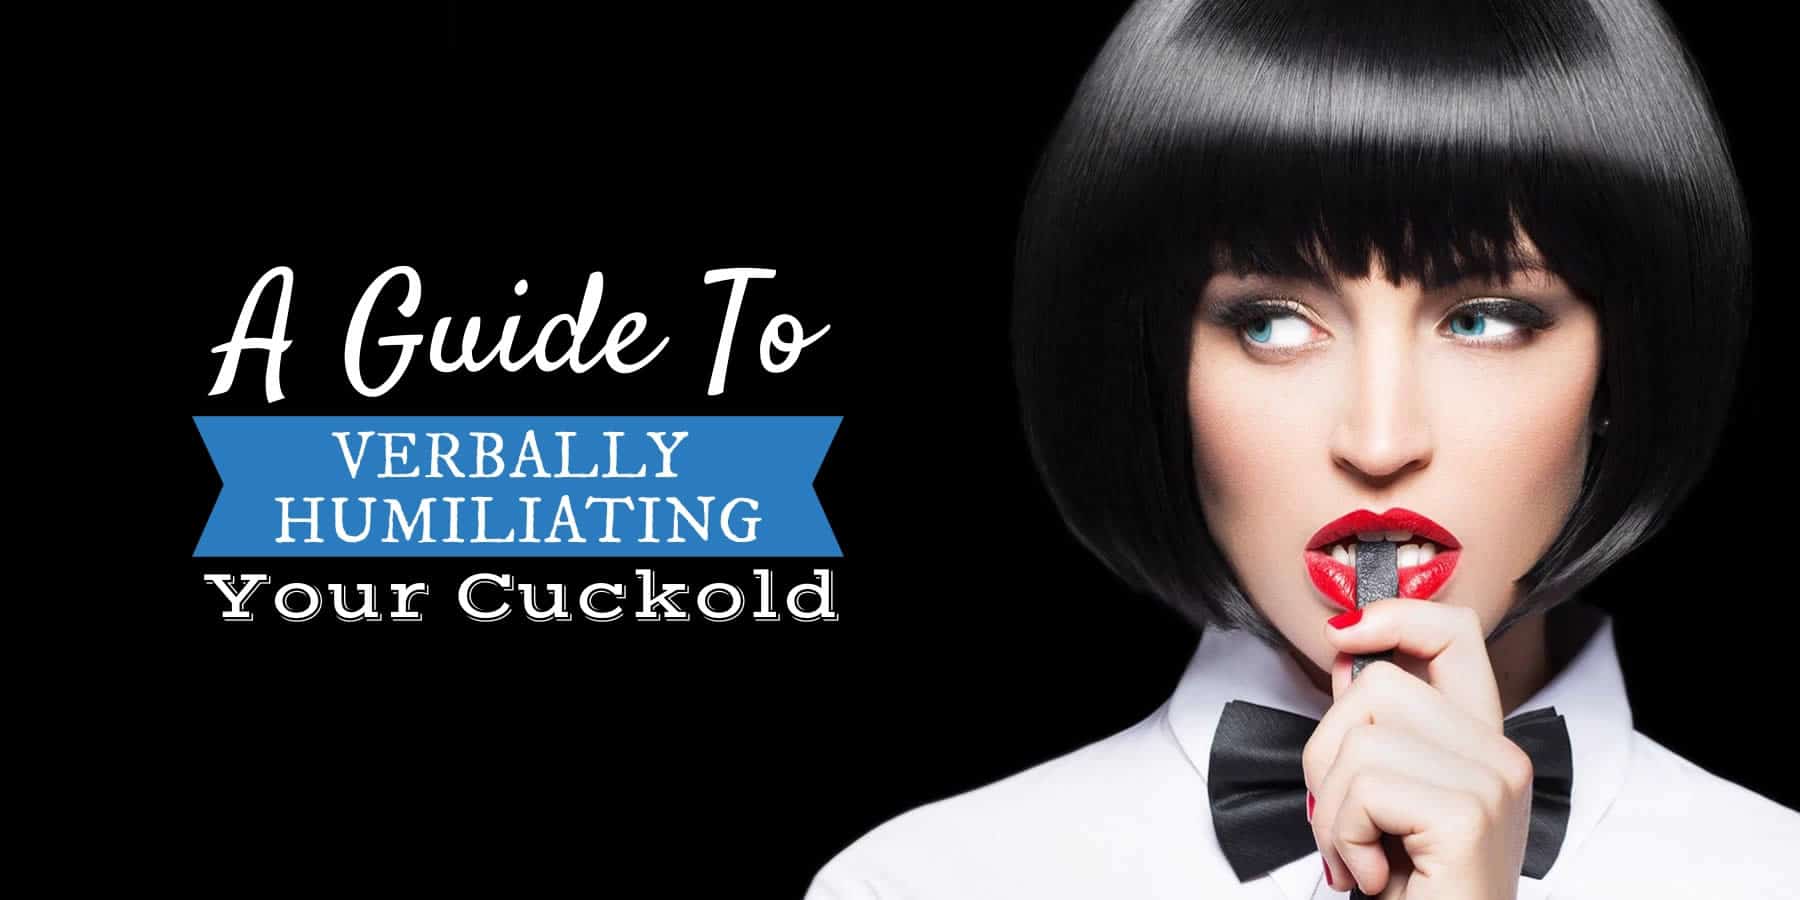 A Guide to Verbally Humiliating Your Cuckold (with Examples) image